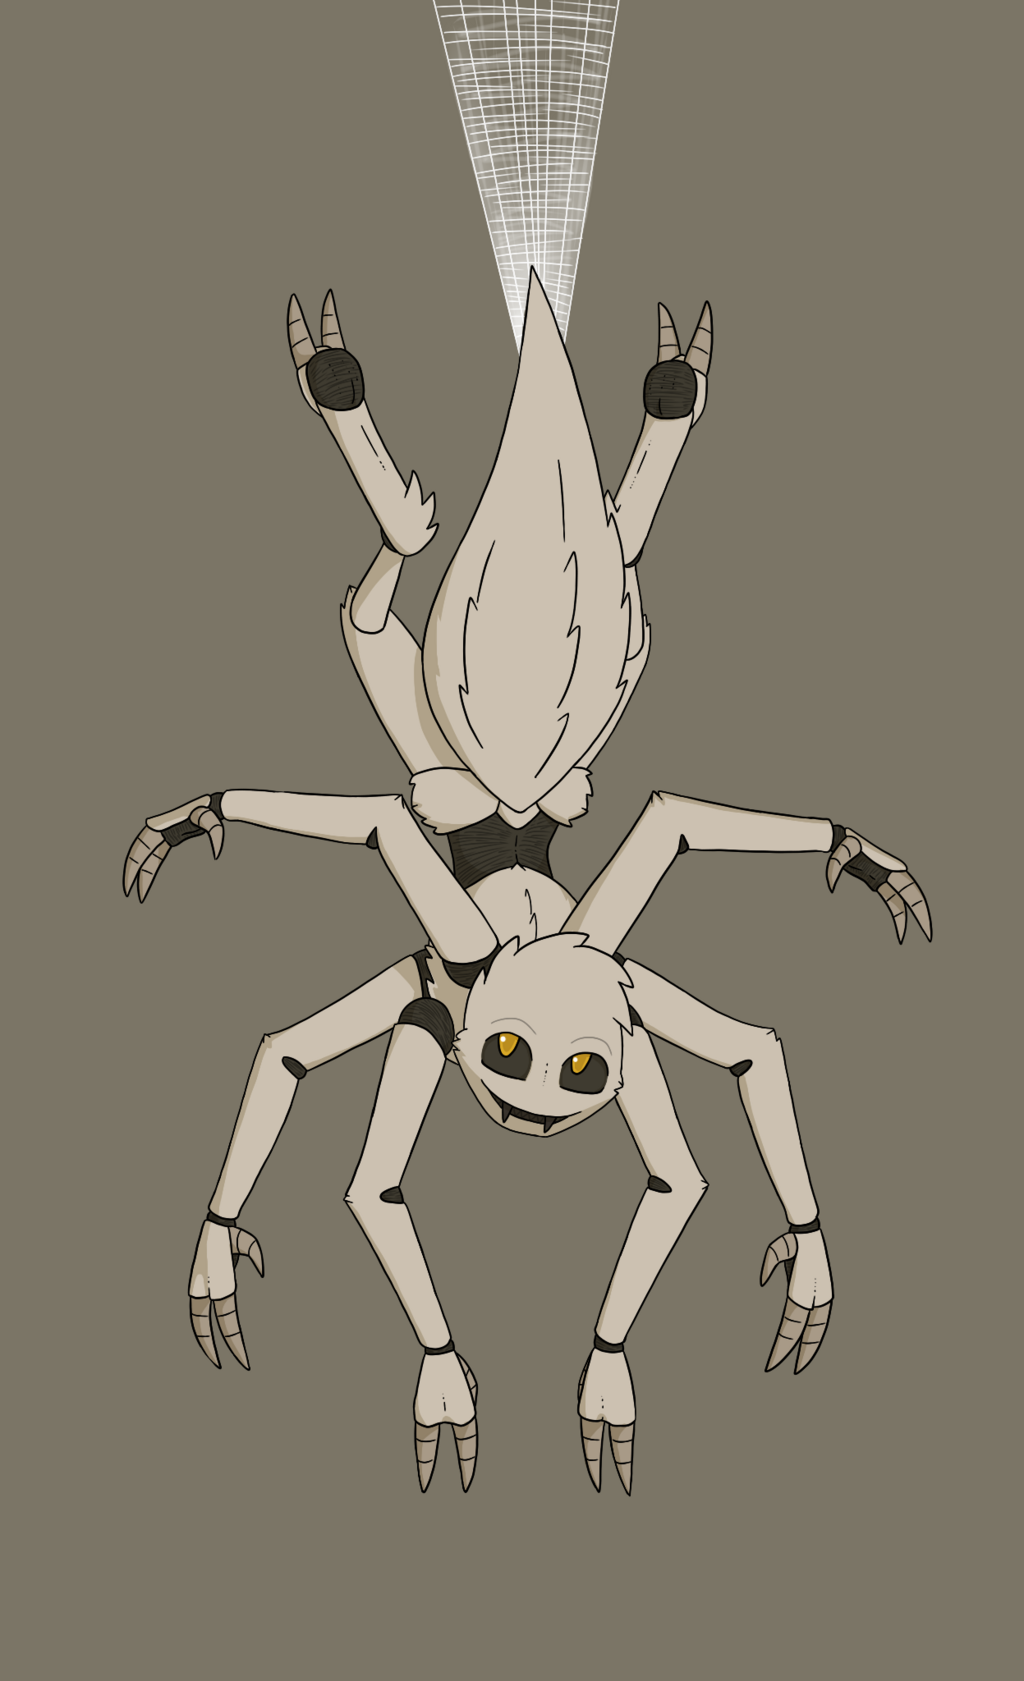 Most recent image: Doing Spider Stuff